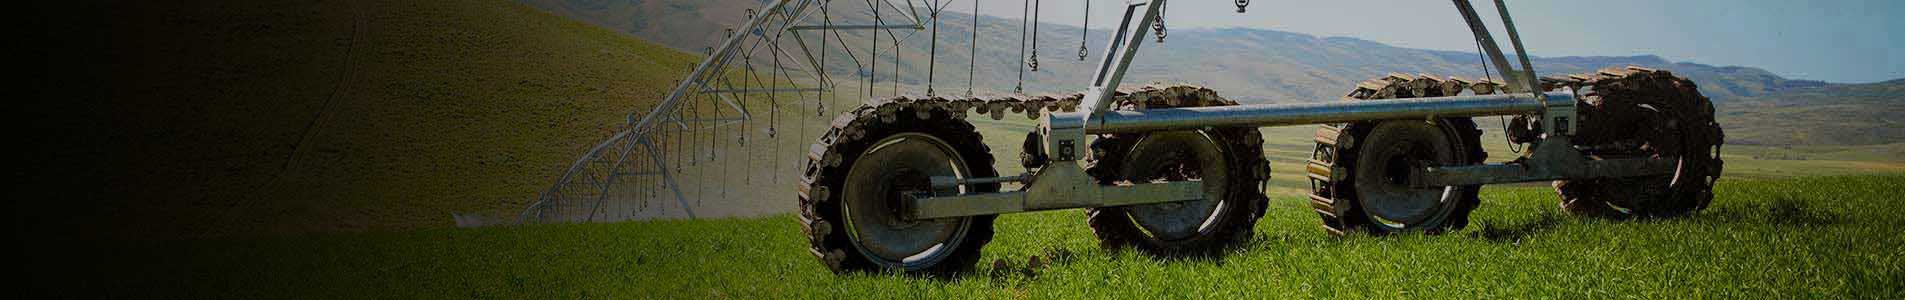 valley articulating track drive - irrigation tires